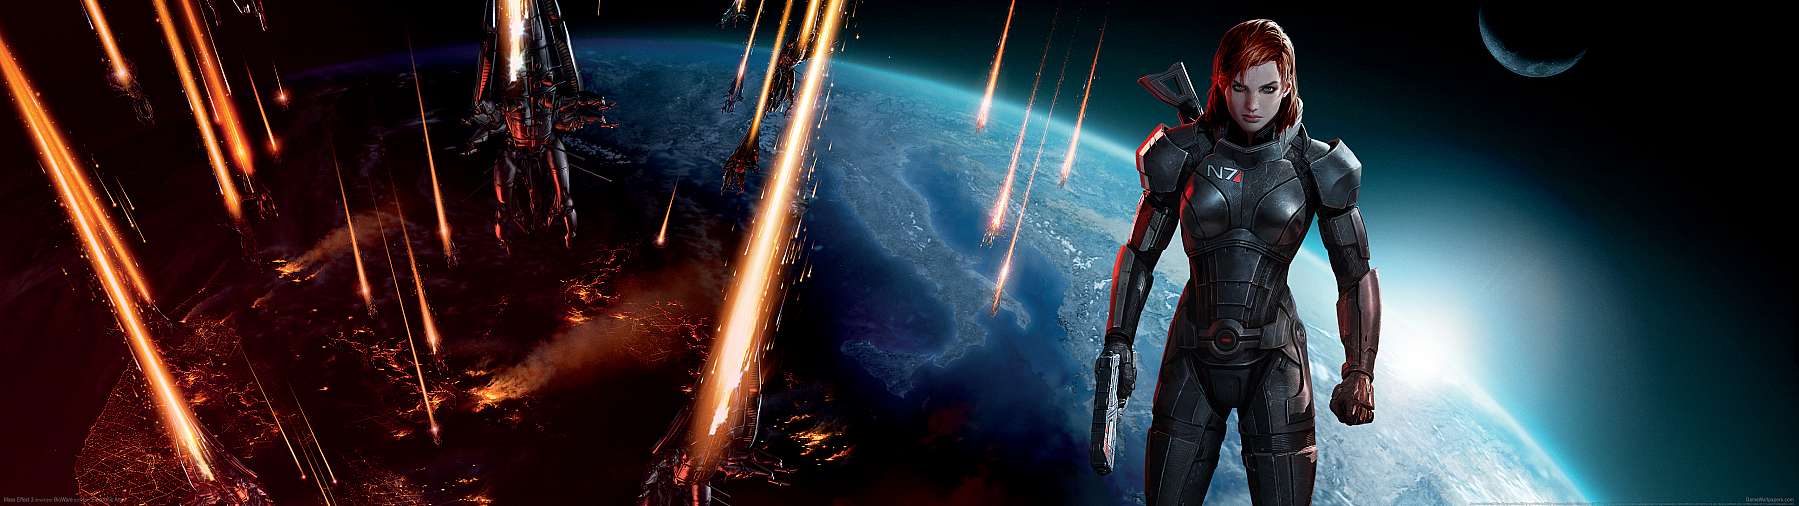 Mass Effect 3 superwide wallpaper or background 11